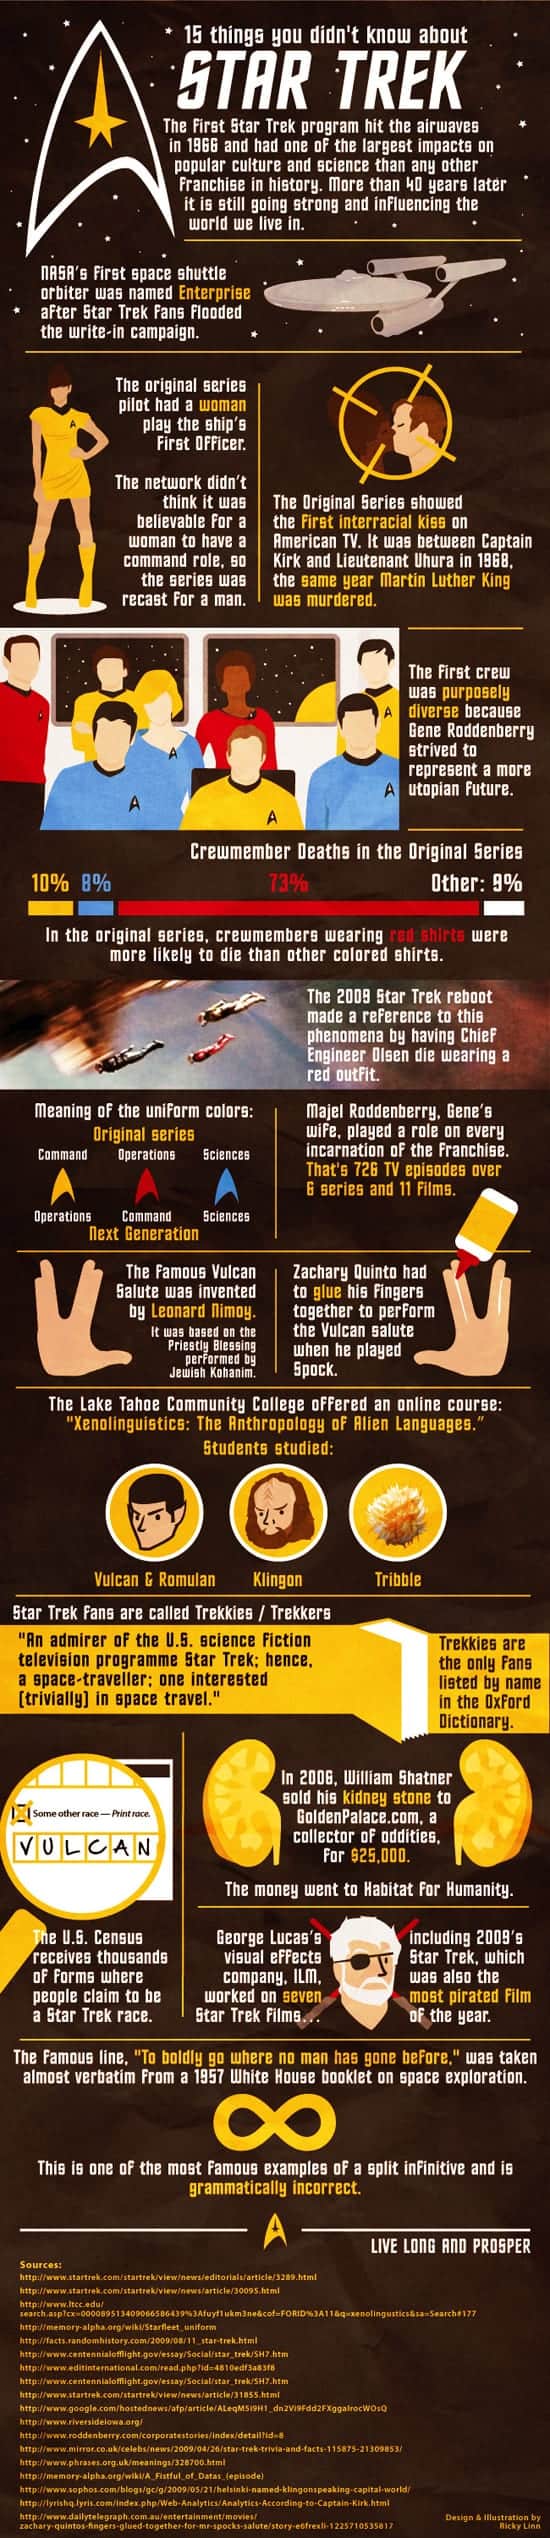 15 Things You Didn't Know About Star Trek